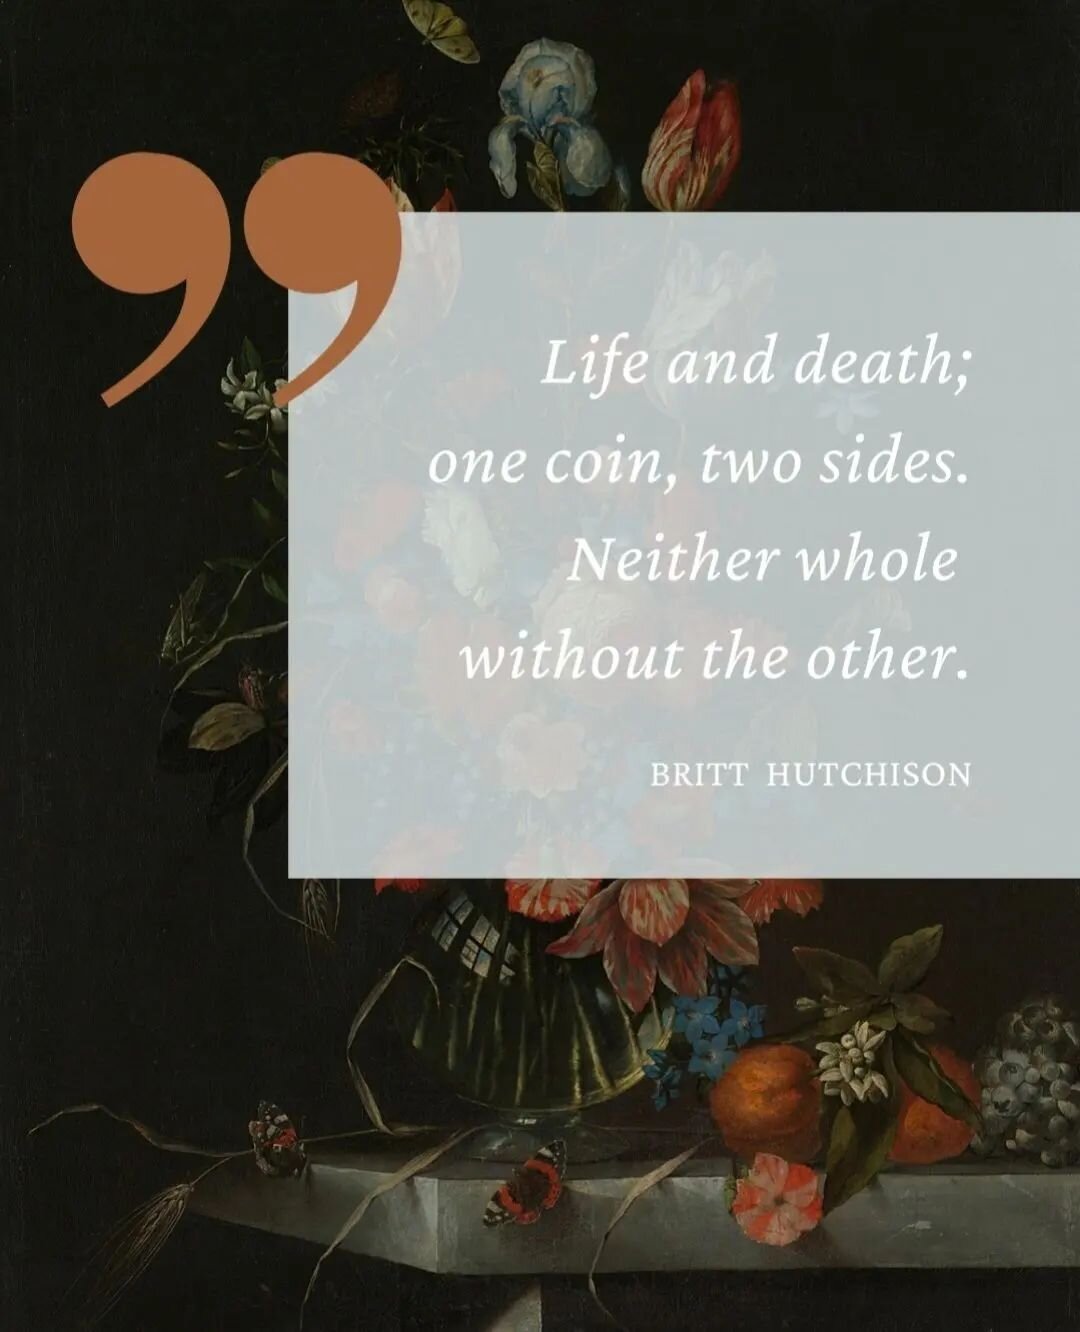 Without death and decomposition, there simply is no life.

🌳🍃🍂💀🪰💩🌱🌳🍃🍂💀🪰💩🌱

From the fuel that we eat to sustain our bodies to the fuel in our vehicles to help move us around in our lives - it all comes from something once living, now de